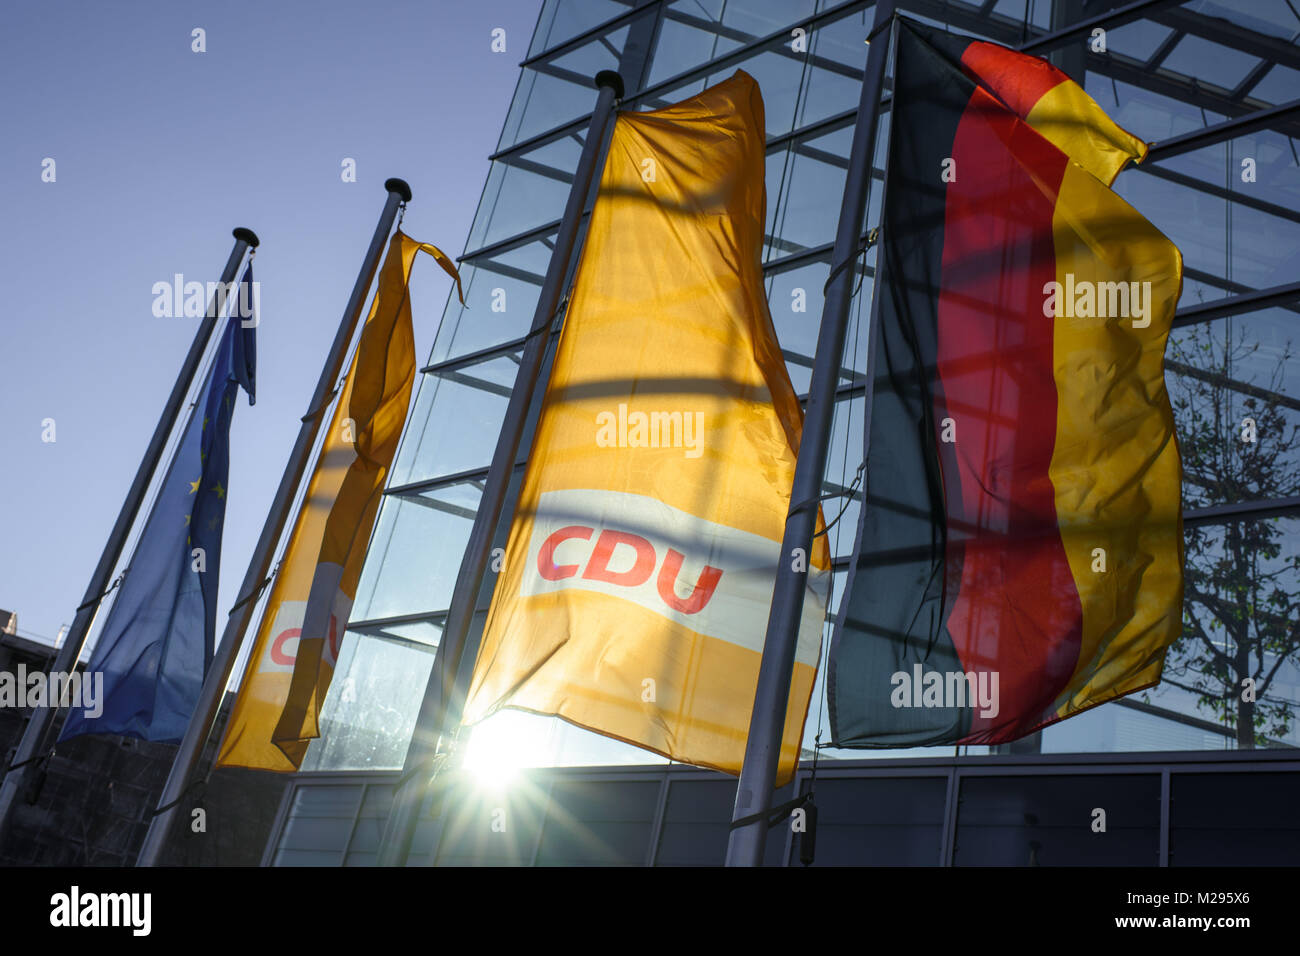 The Europe flag (L-R), two flags of the Christian Democratic Union party (CDU) and a Germany flag blowing in the wind in front of the party headquarters of the CDU, the Konrad Adenauer house, in Berlin, Germany, 06 Febuary 2018. The coalition negotiations of the Christian Democratic Union (CDU), Christian Social Union (CSU) and the Social Democratic Party (SPD) are taking place there today. Photo: Gregor Fischer/dpa Stock Photo